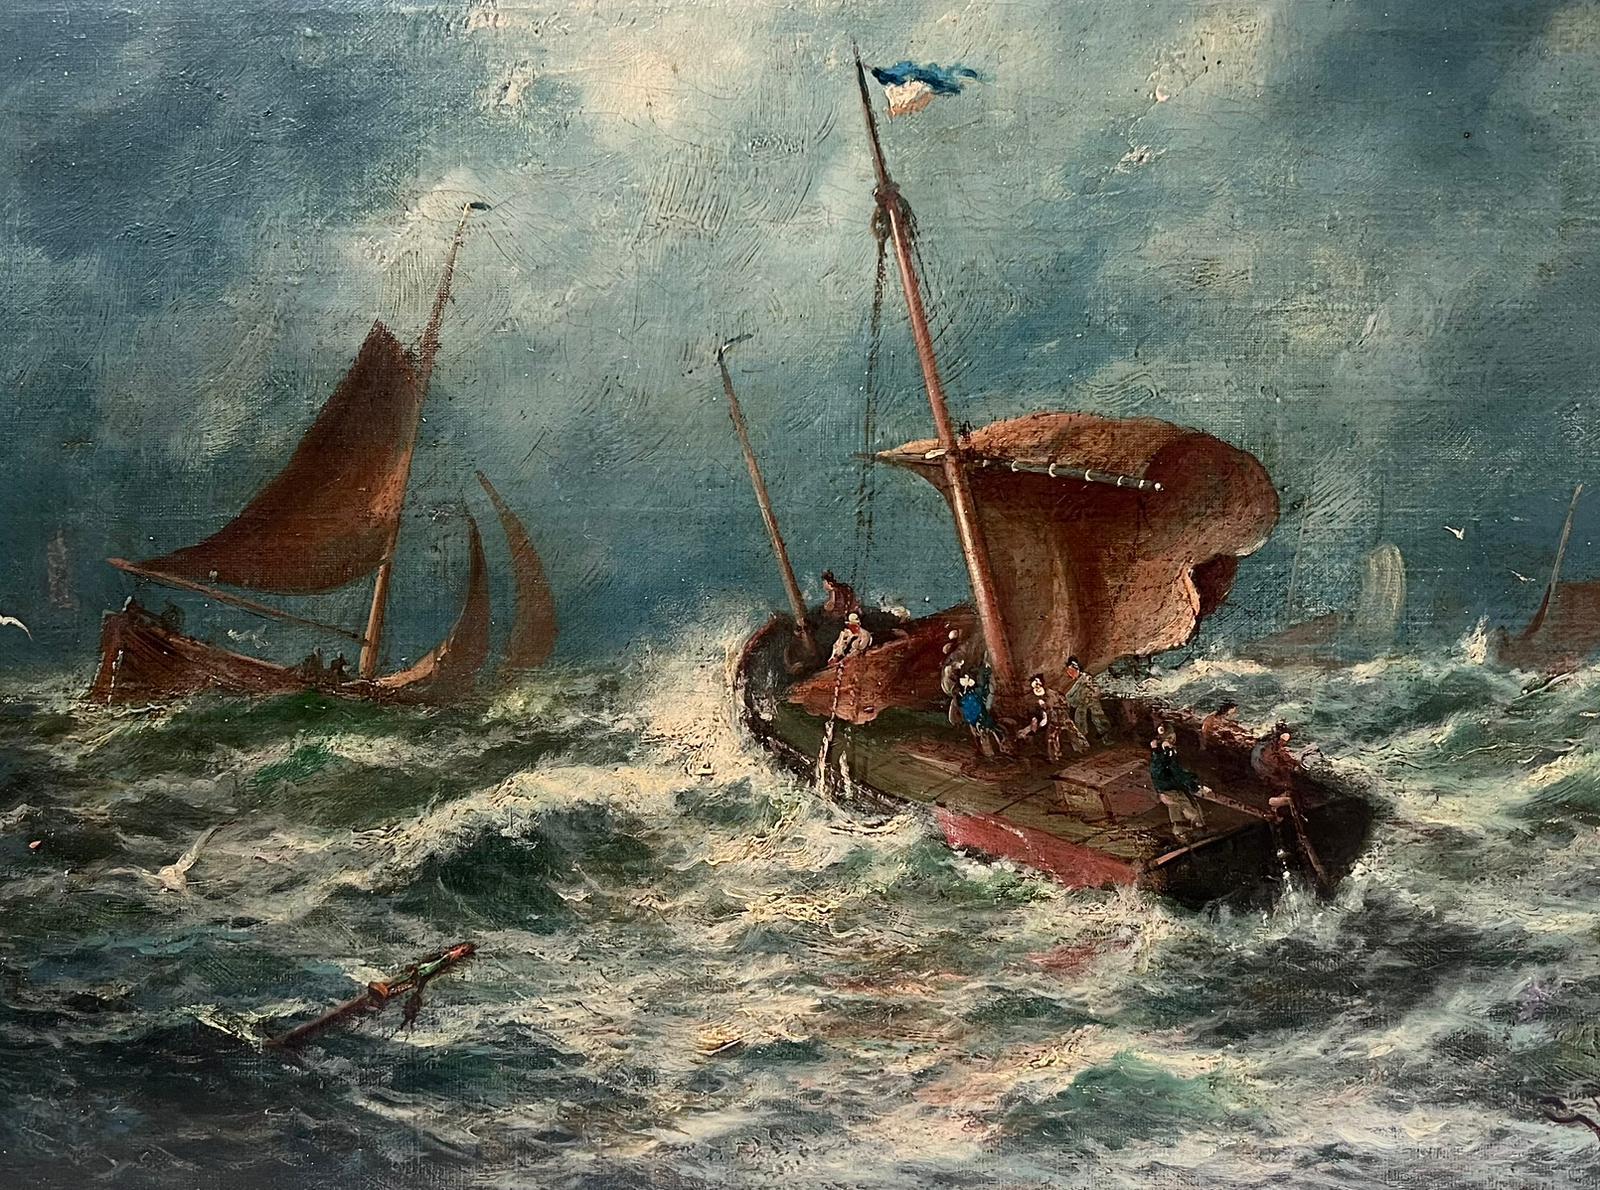 Stormy Seas
English School, 19th century
signed oil on canvas, unframed
canvas: 16 x 24 inches
provenance: private collection, UK
condition: very good and sound condition